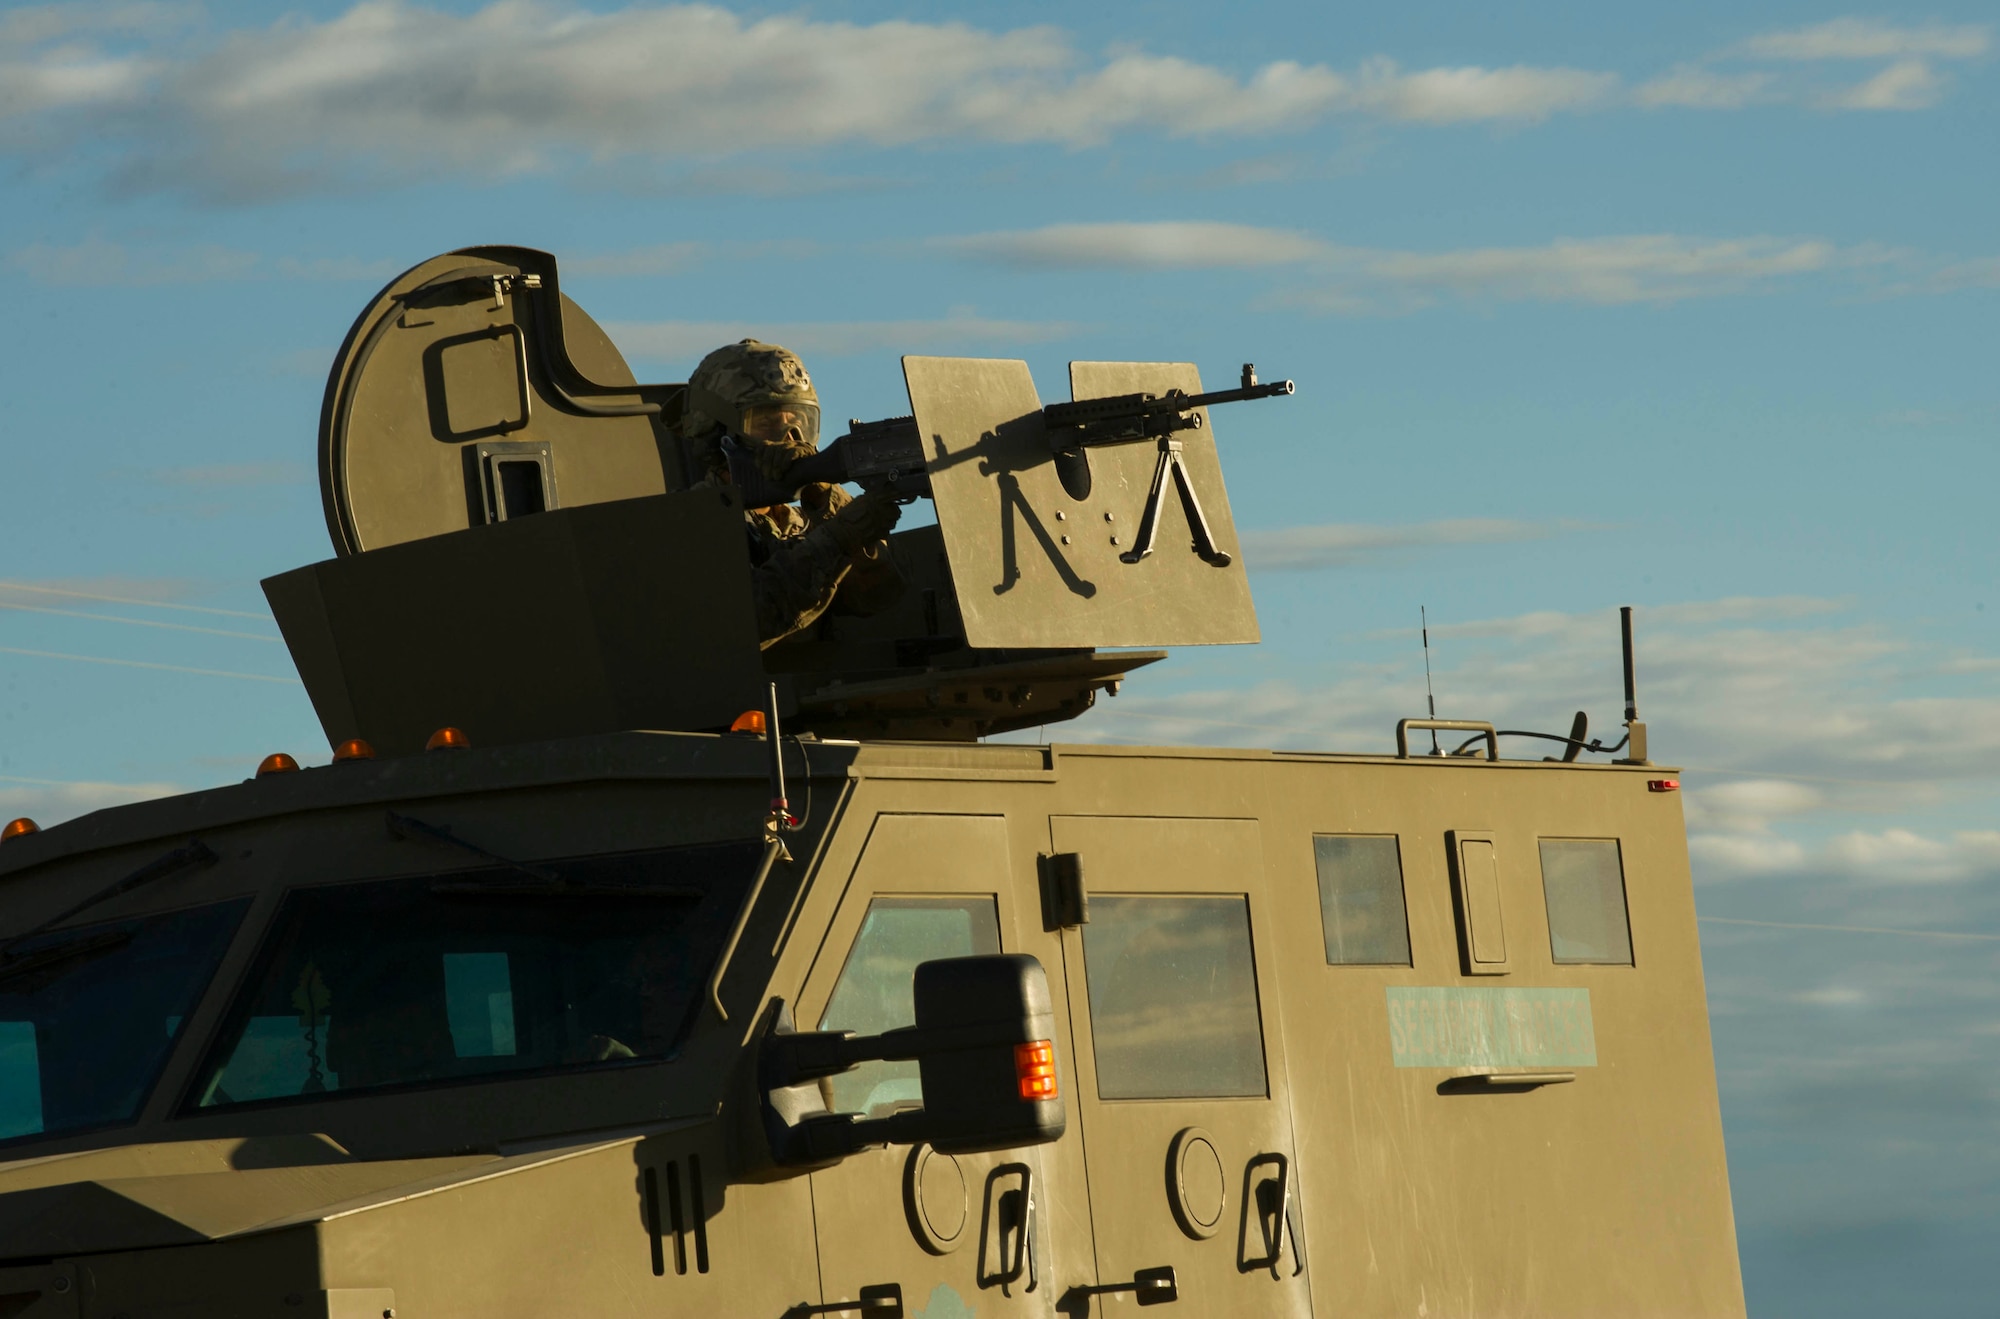 A defender from the 791st Missile Security Forces Squadron provides security during a recapture and recovery exercise at the missile complex, N.D., Nov. 16, 2016. During the simulated scenario, defenders recovered an asset that was taken over by hostile forces. (U.S. Air Force photo/Senior Airman Apryl Hall)